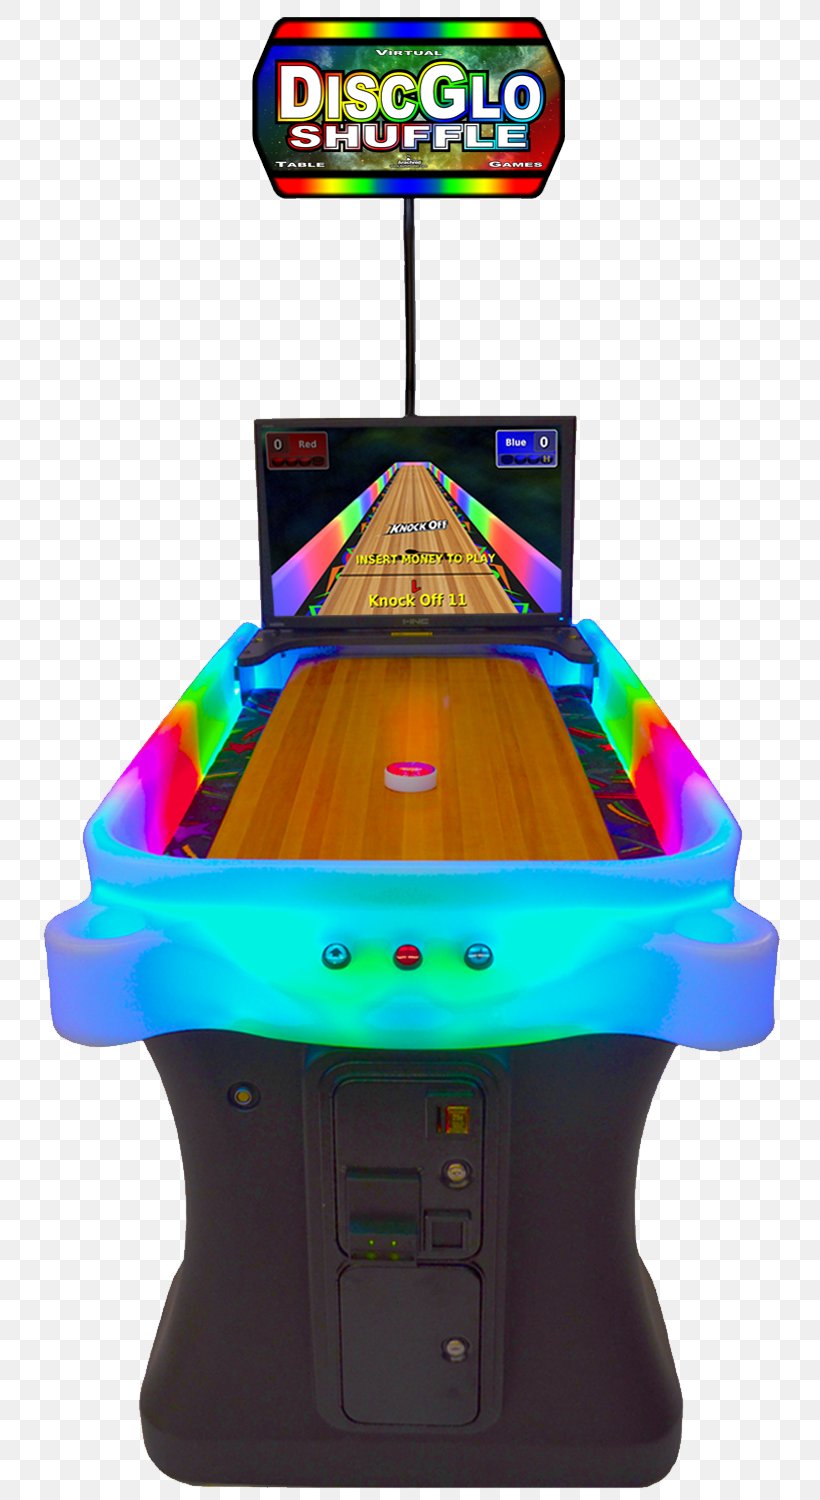 Table Shovelboard Deck Shovelboard Arcade Game Bowling Amusement Arcade, PNG, 751x1500px, Table Shovelboard, Amusement Arcade, Arcade Game, Billiard Tables, Billiards Download Free